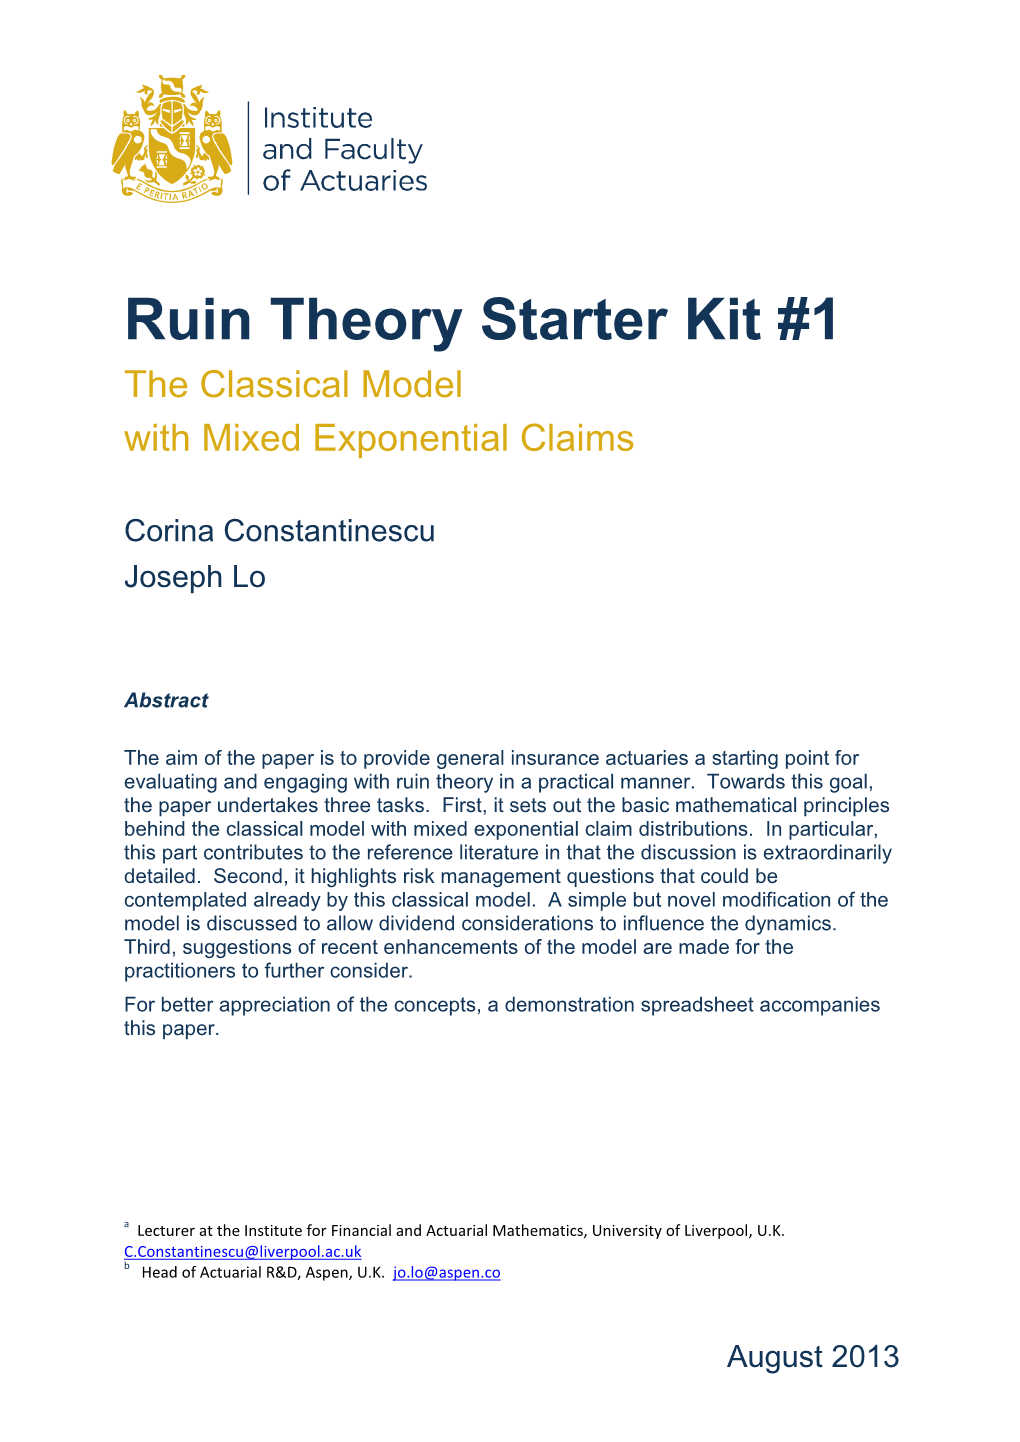 Ruin Theory Starter Kit #1 the Classical Model with Mixed Exponential Claims